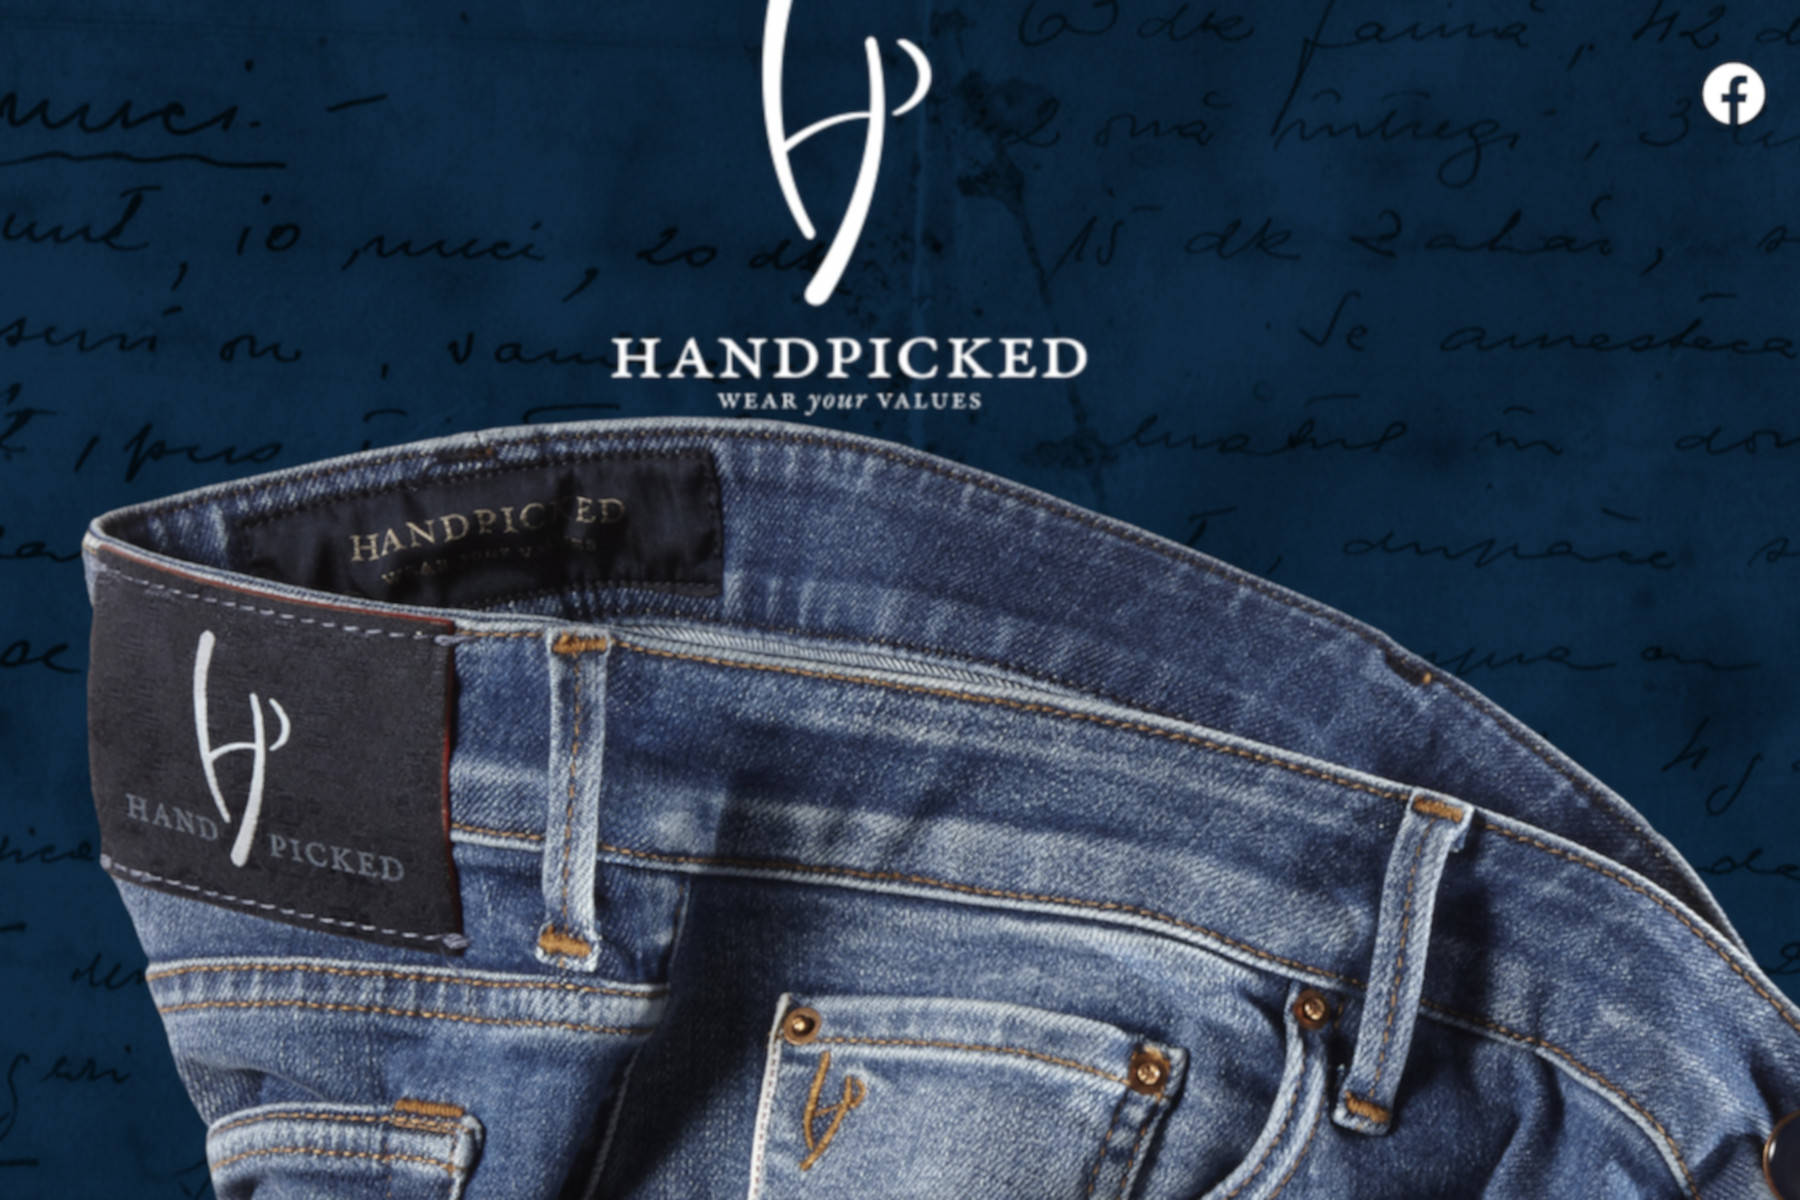 OREV per Hand Picked  – wear your values –